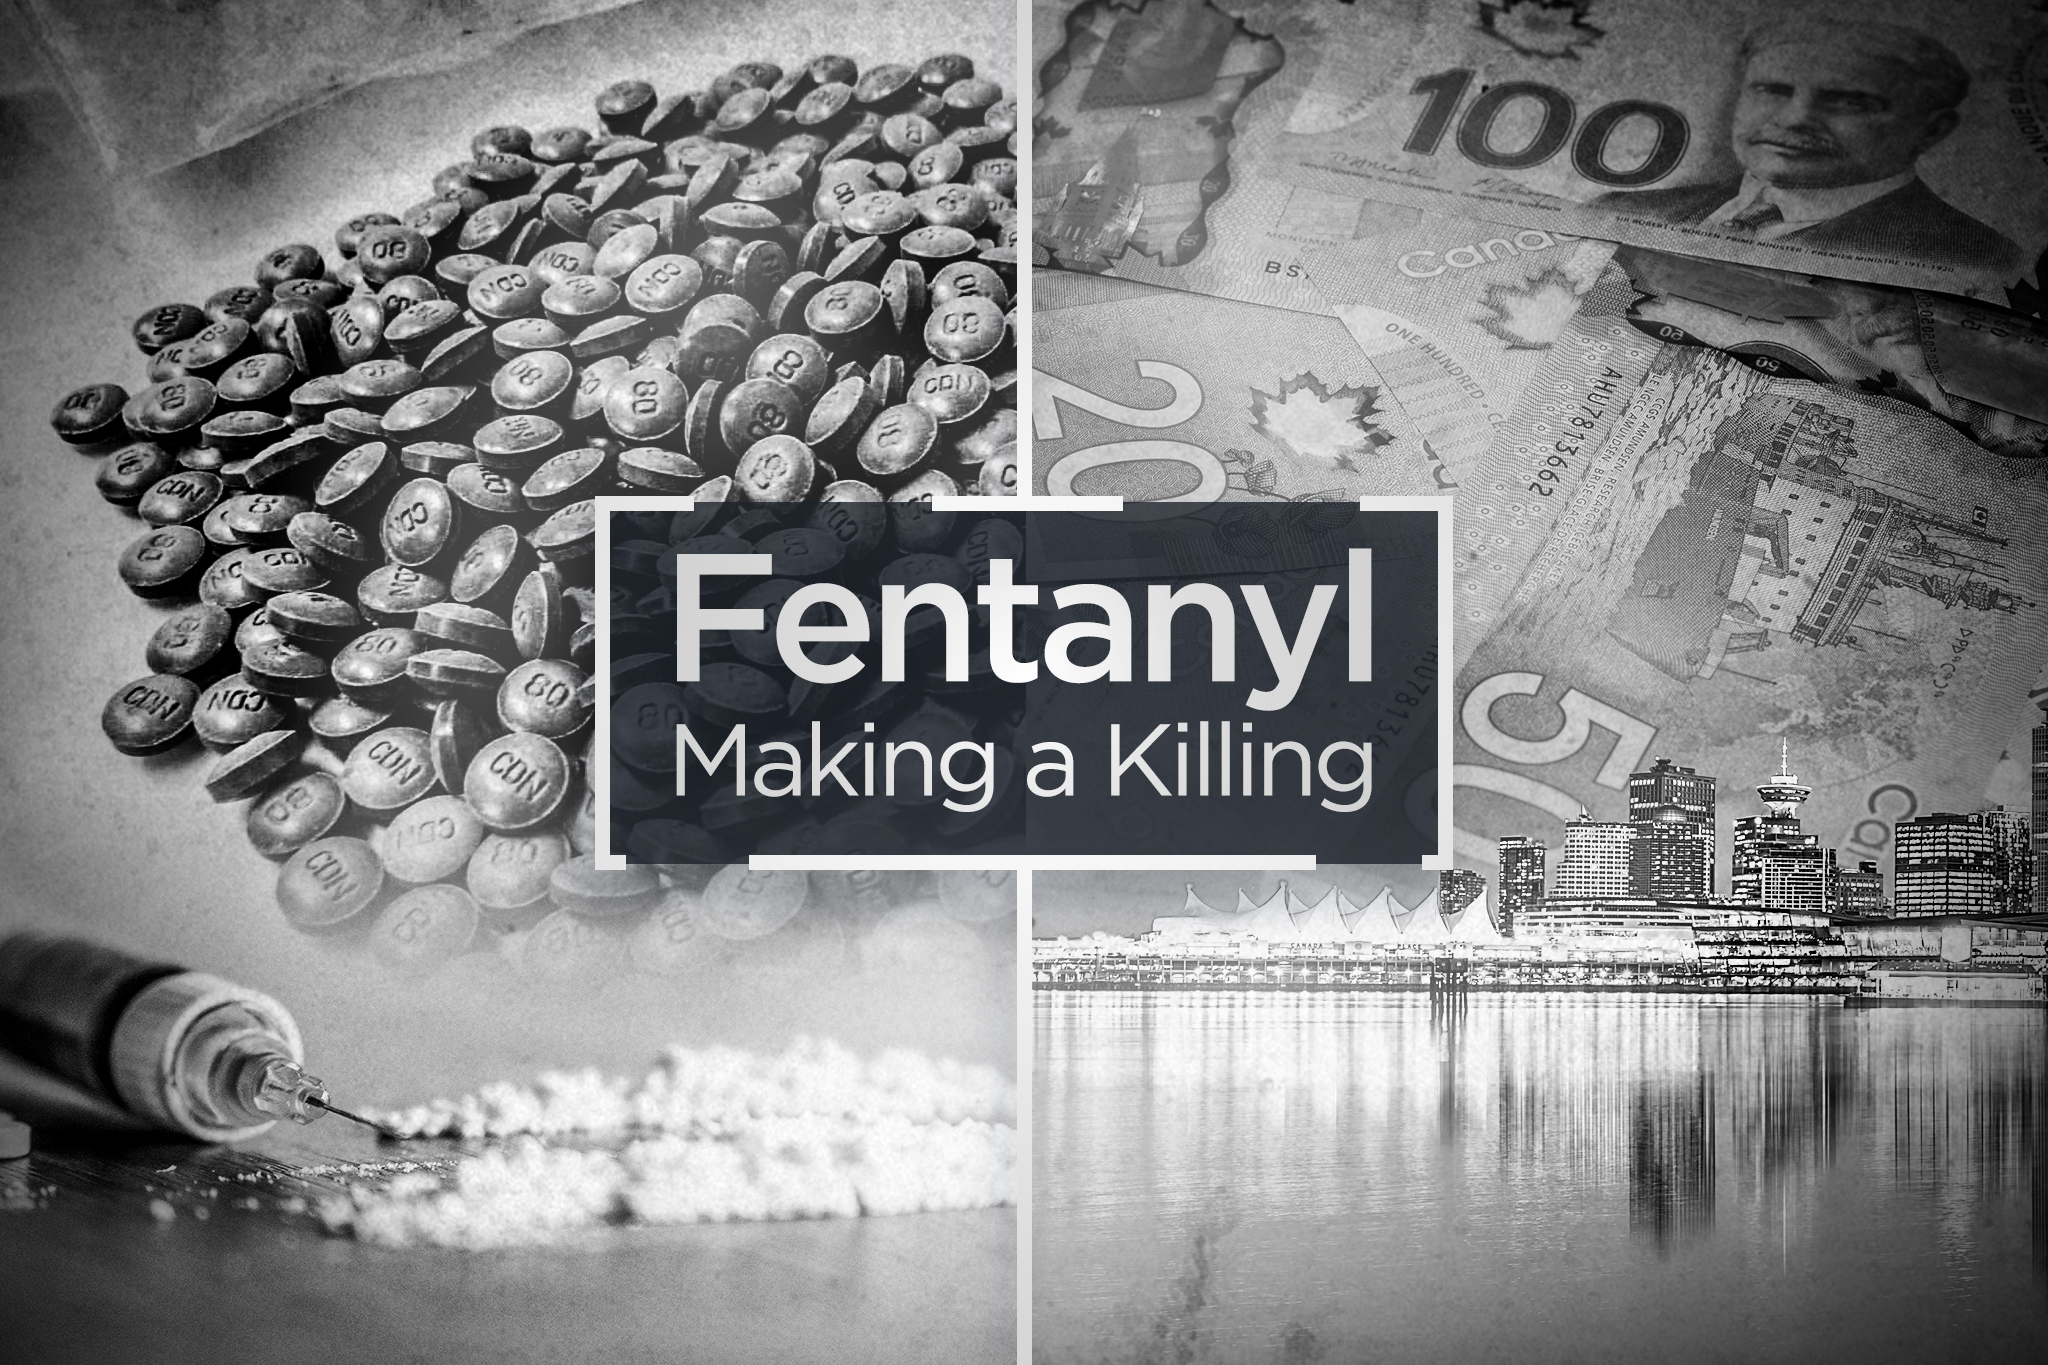 Edmonton police seize thousands of fentanyl pills disguised as